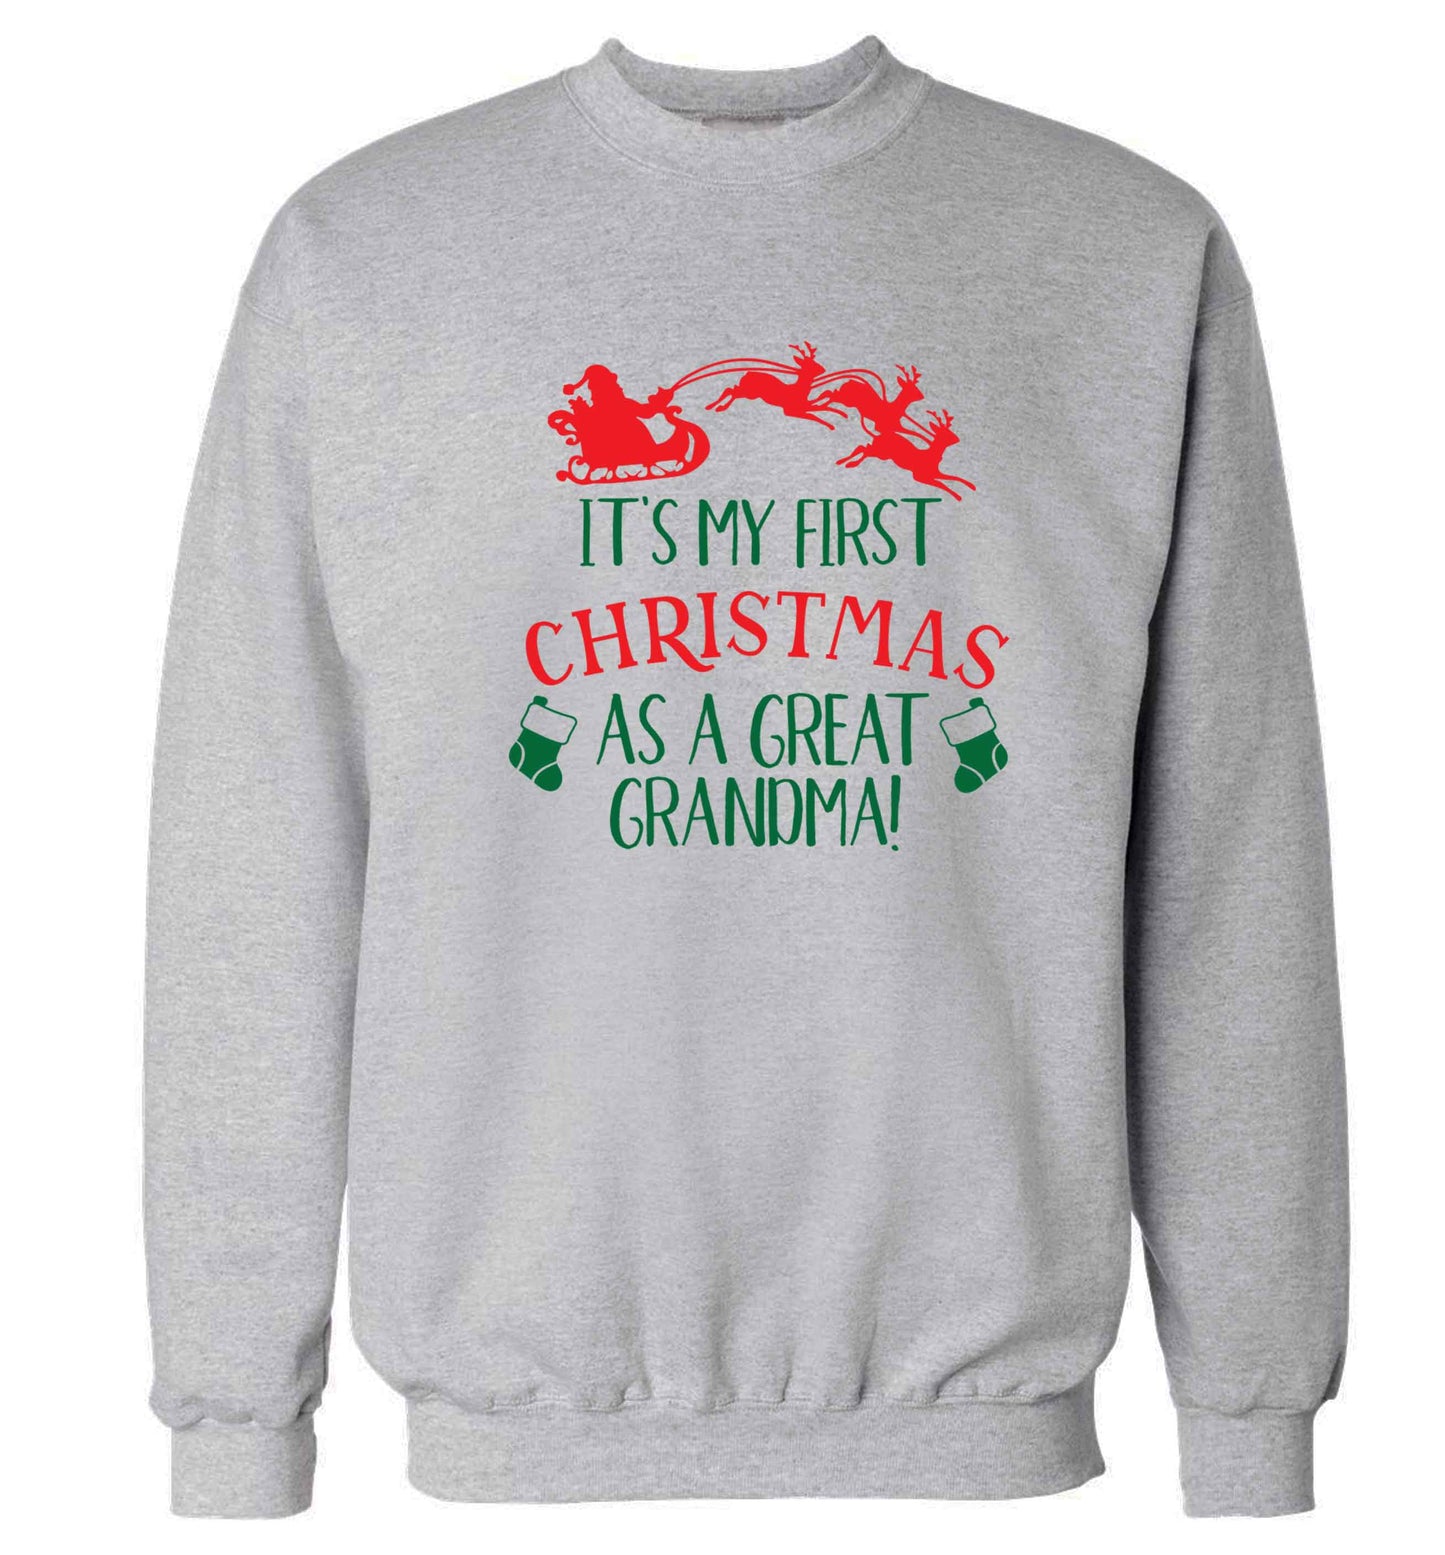 It's my first Christmas as a great grandma! Adult's unisex grey Sweater 2XL